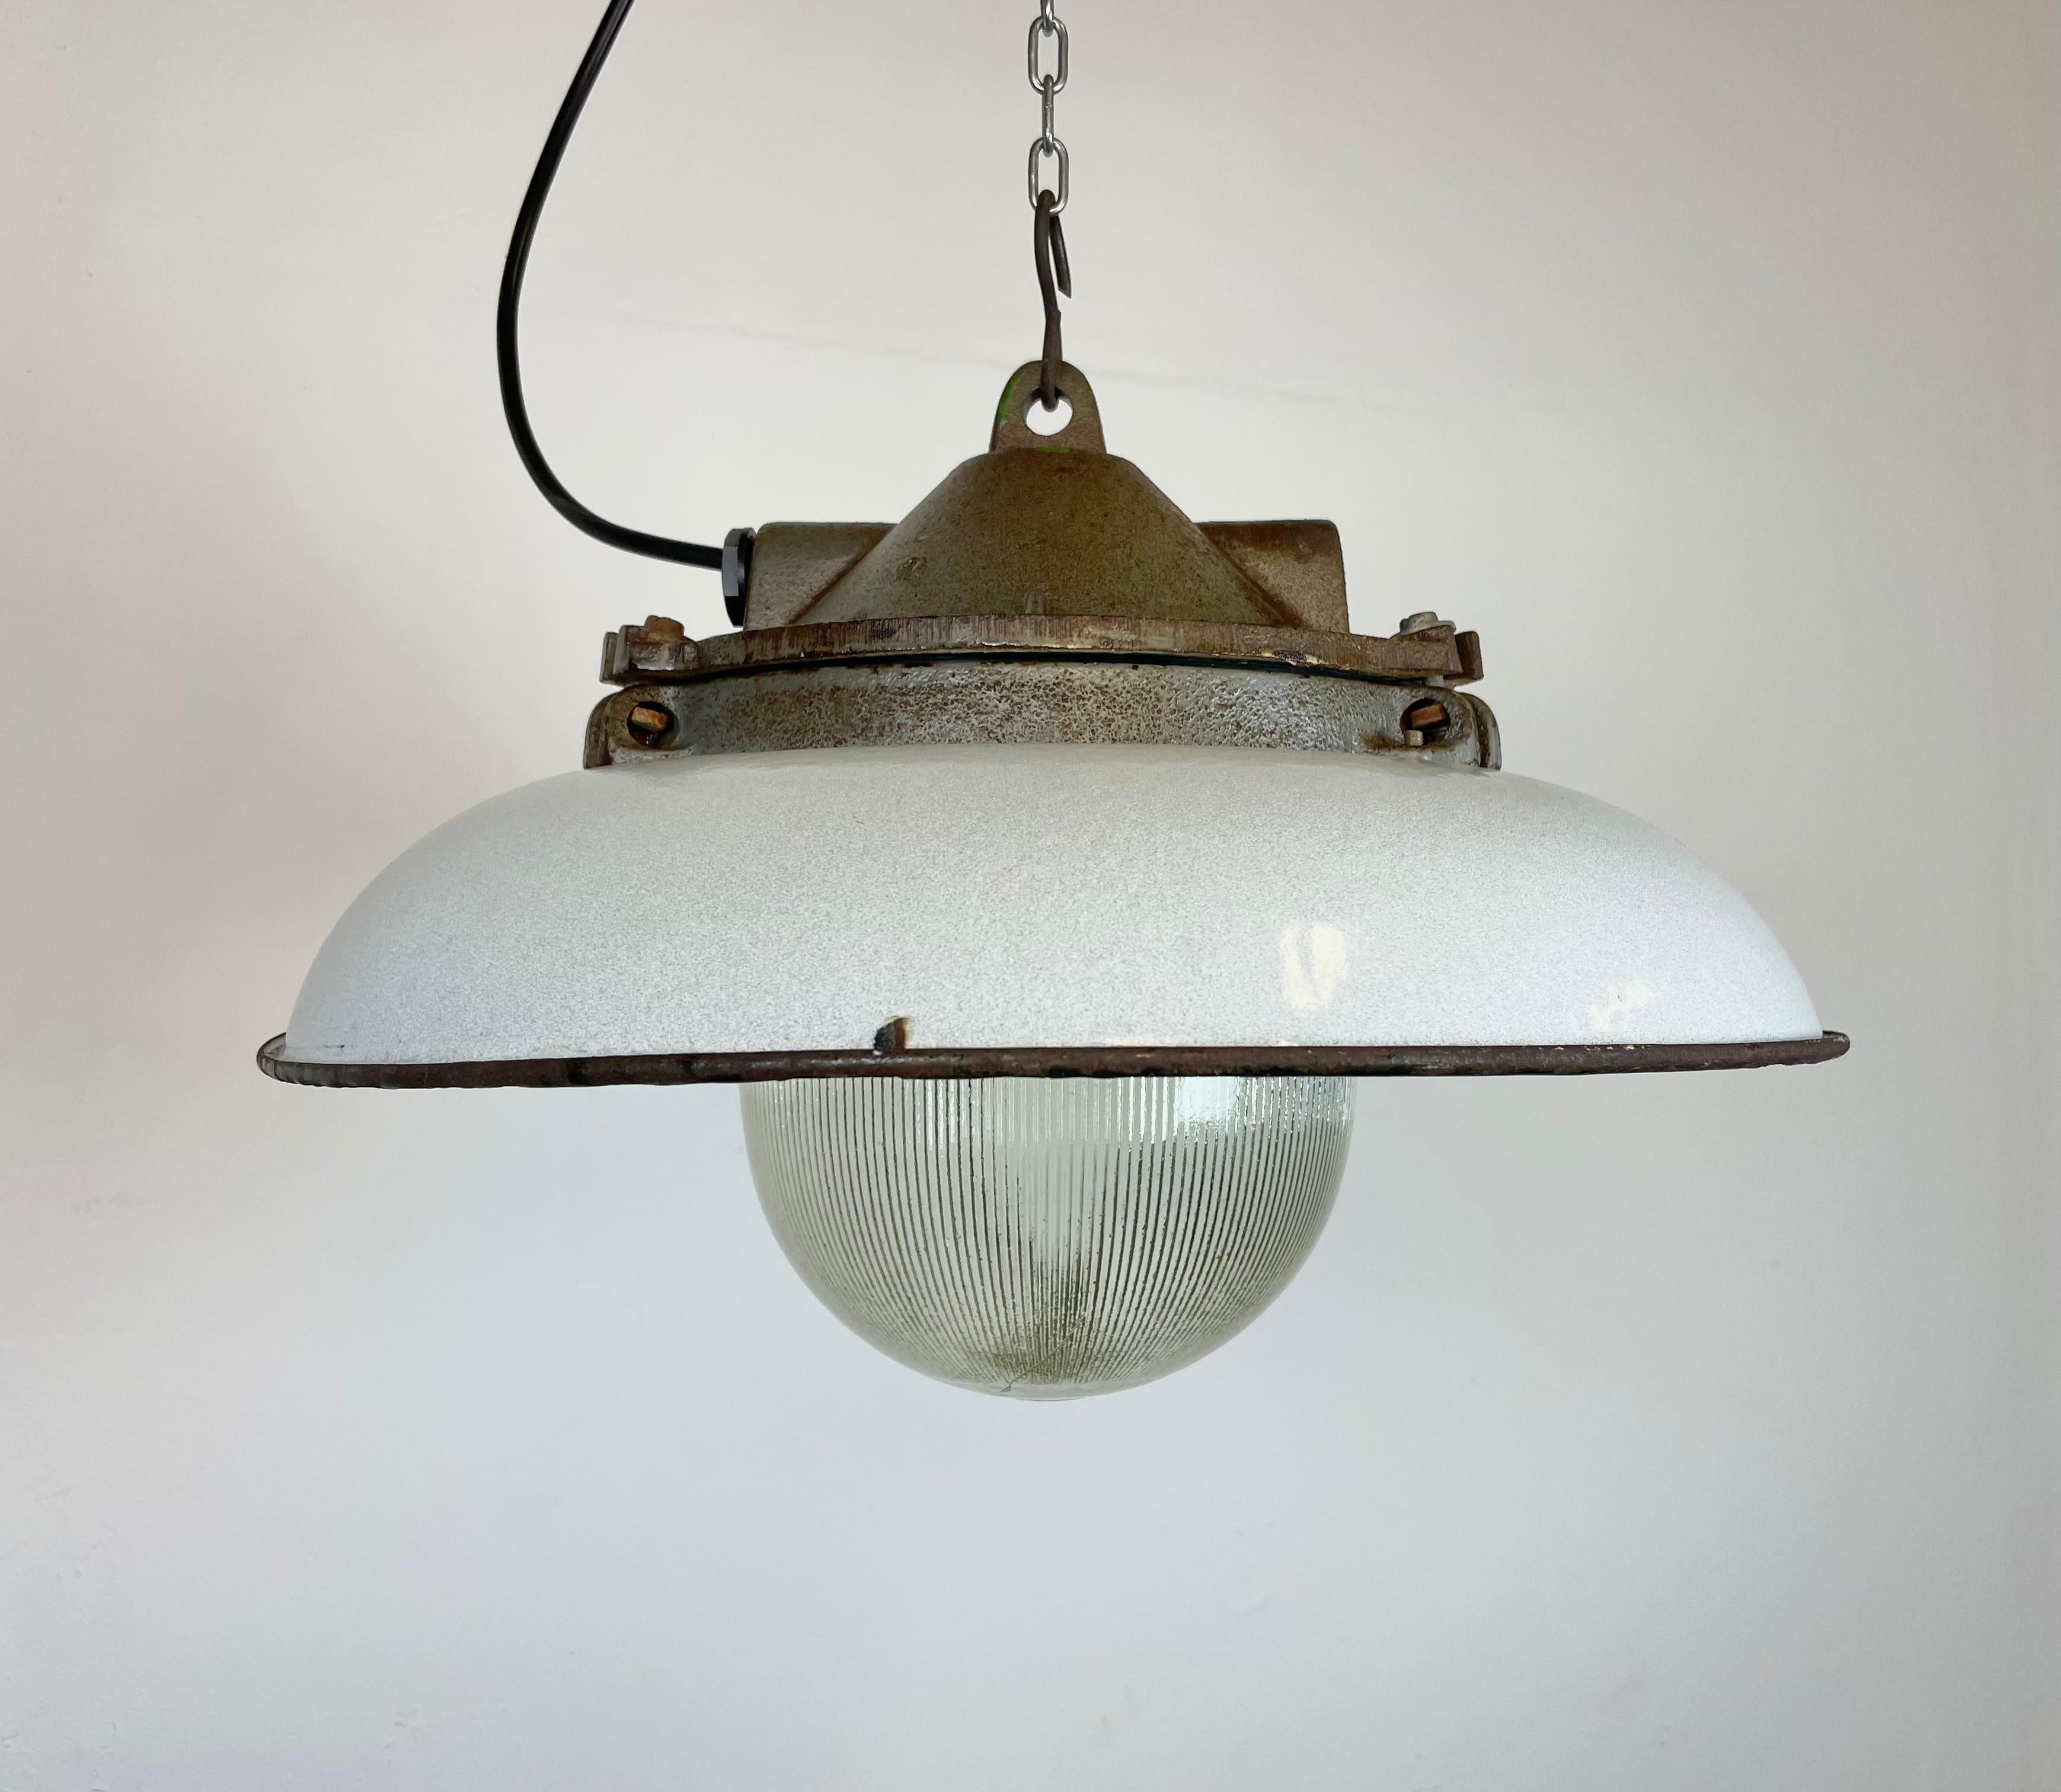 - Industrial factory pendant lamp in cast iron
- Manufactured by Zaos in Poland during the 1960s
- Light grey enamel shade with white enamel interior 
- Holophane glass cover
- Weight: 7 kg.